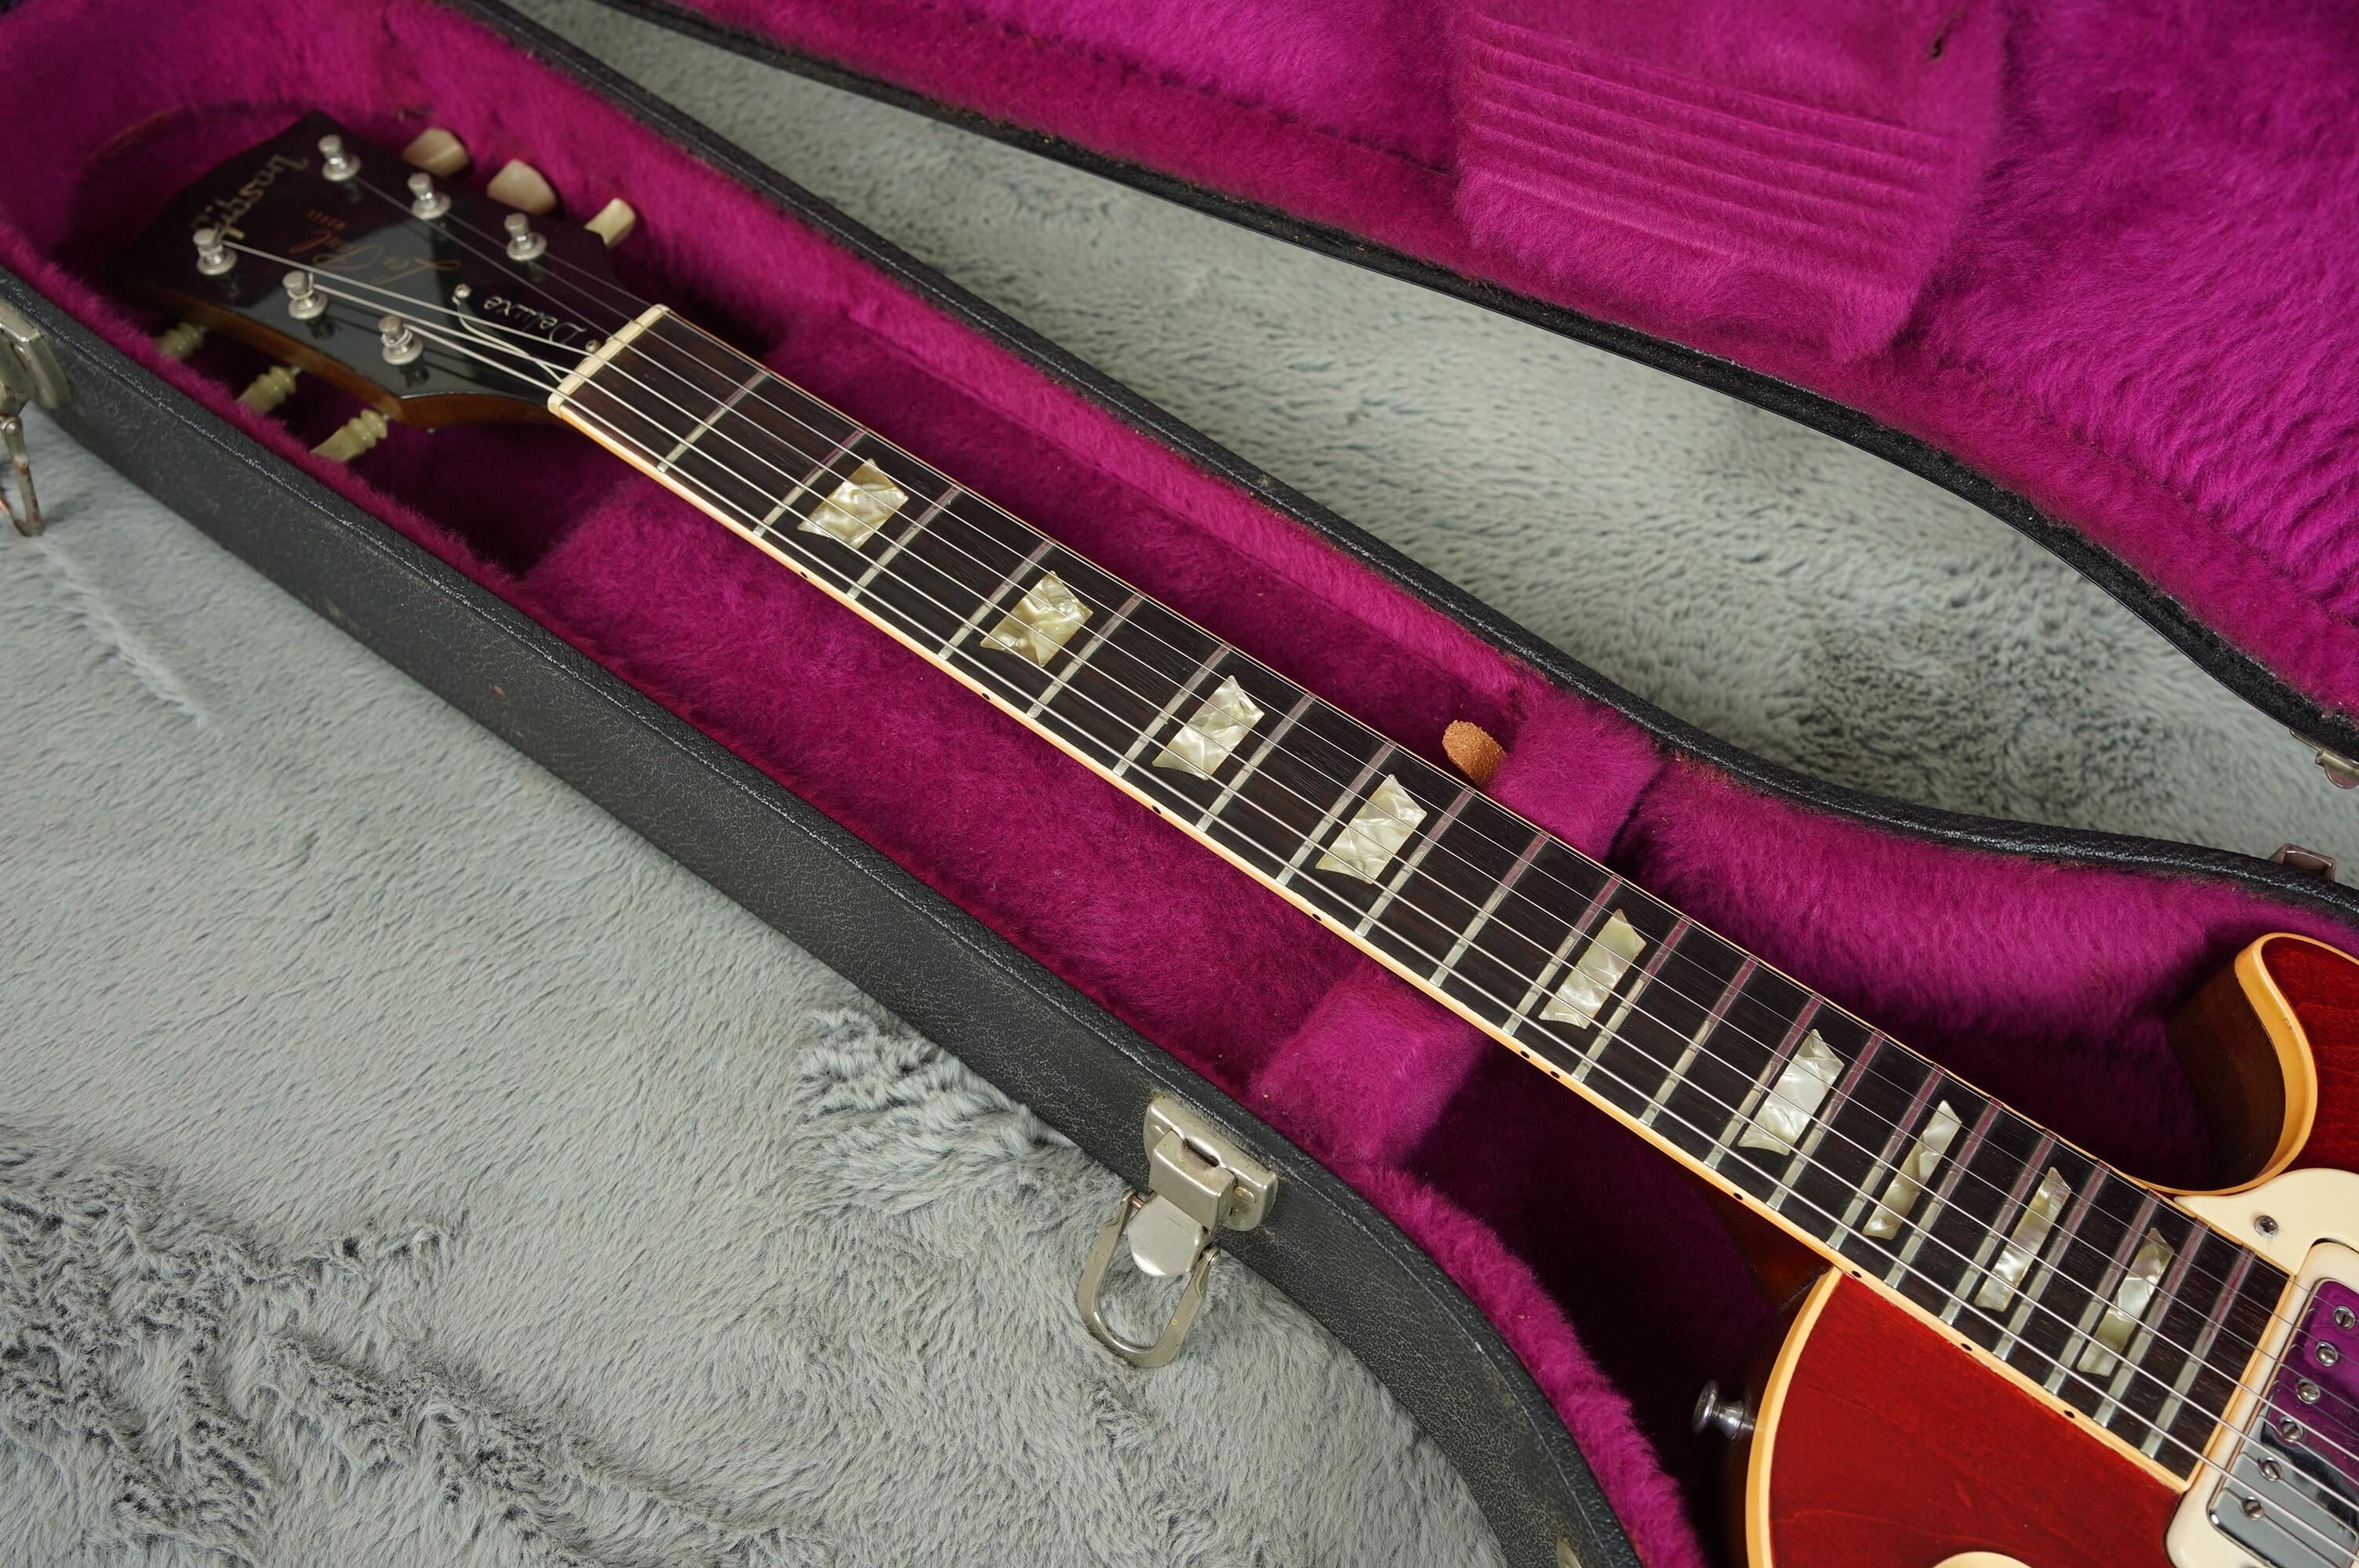 1973 Gibson Les Paul Deluxe Cherry Red